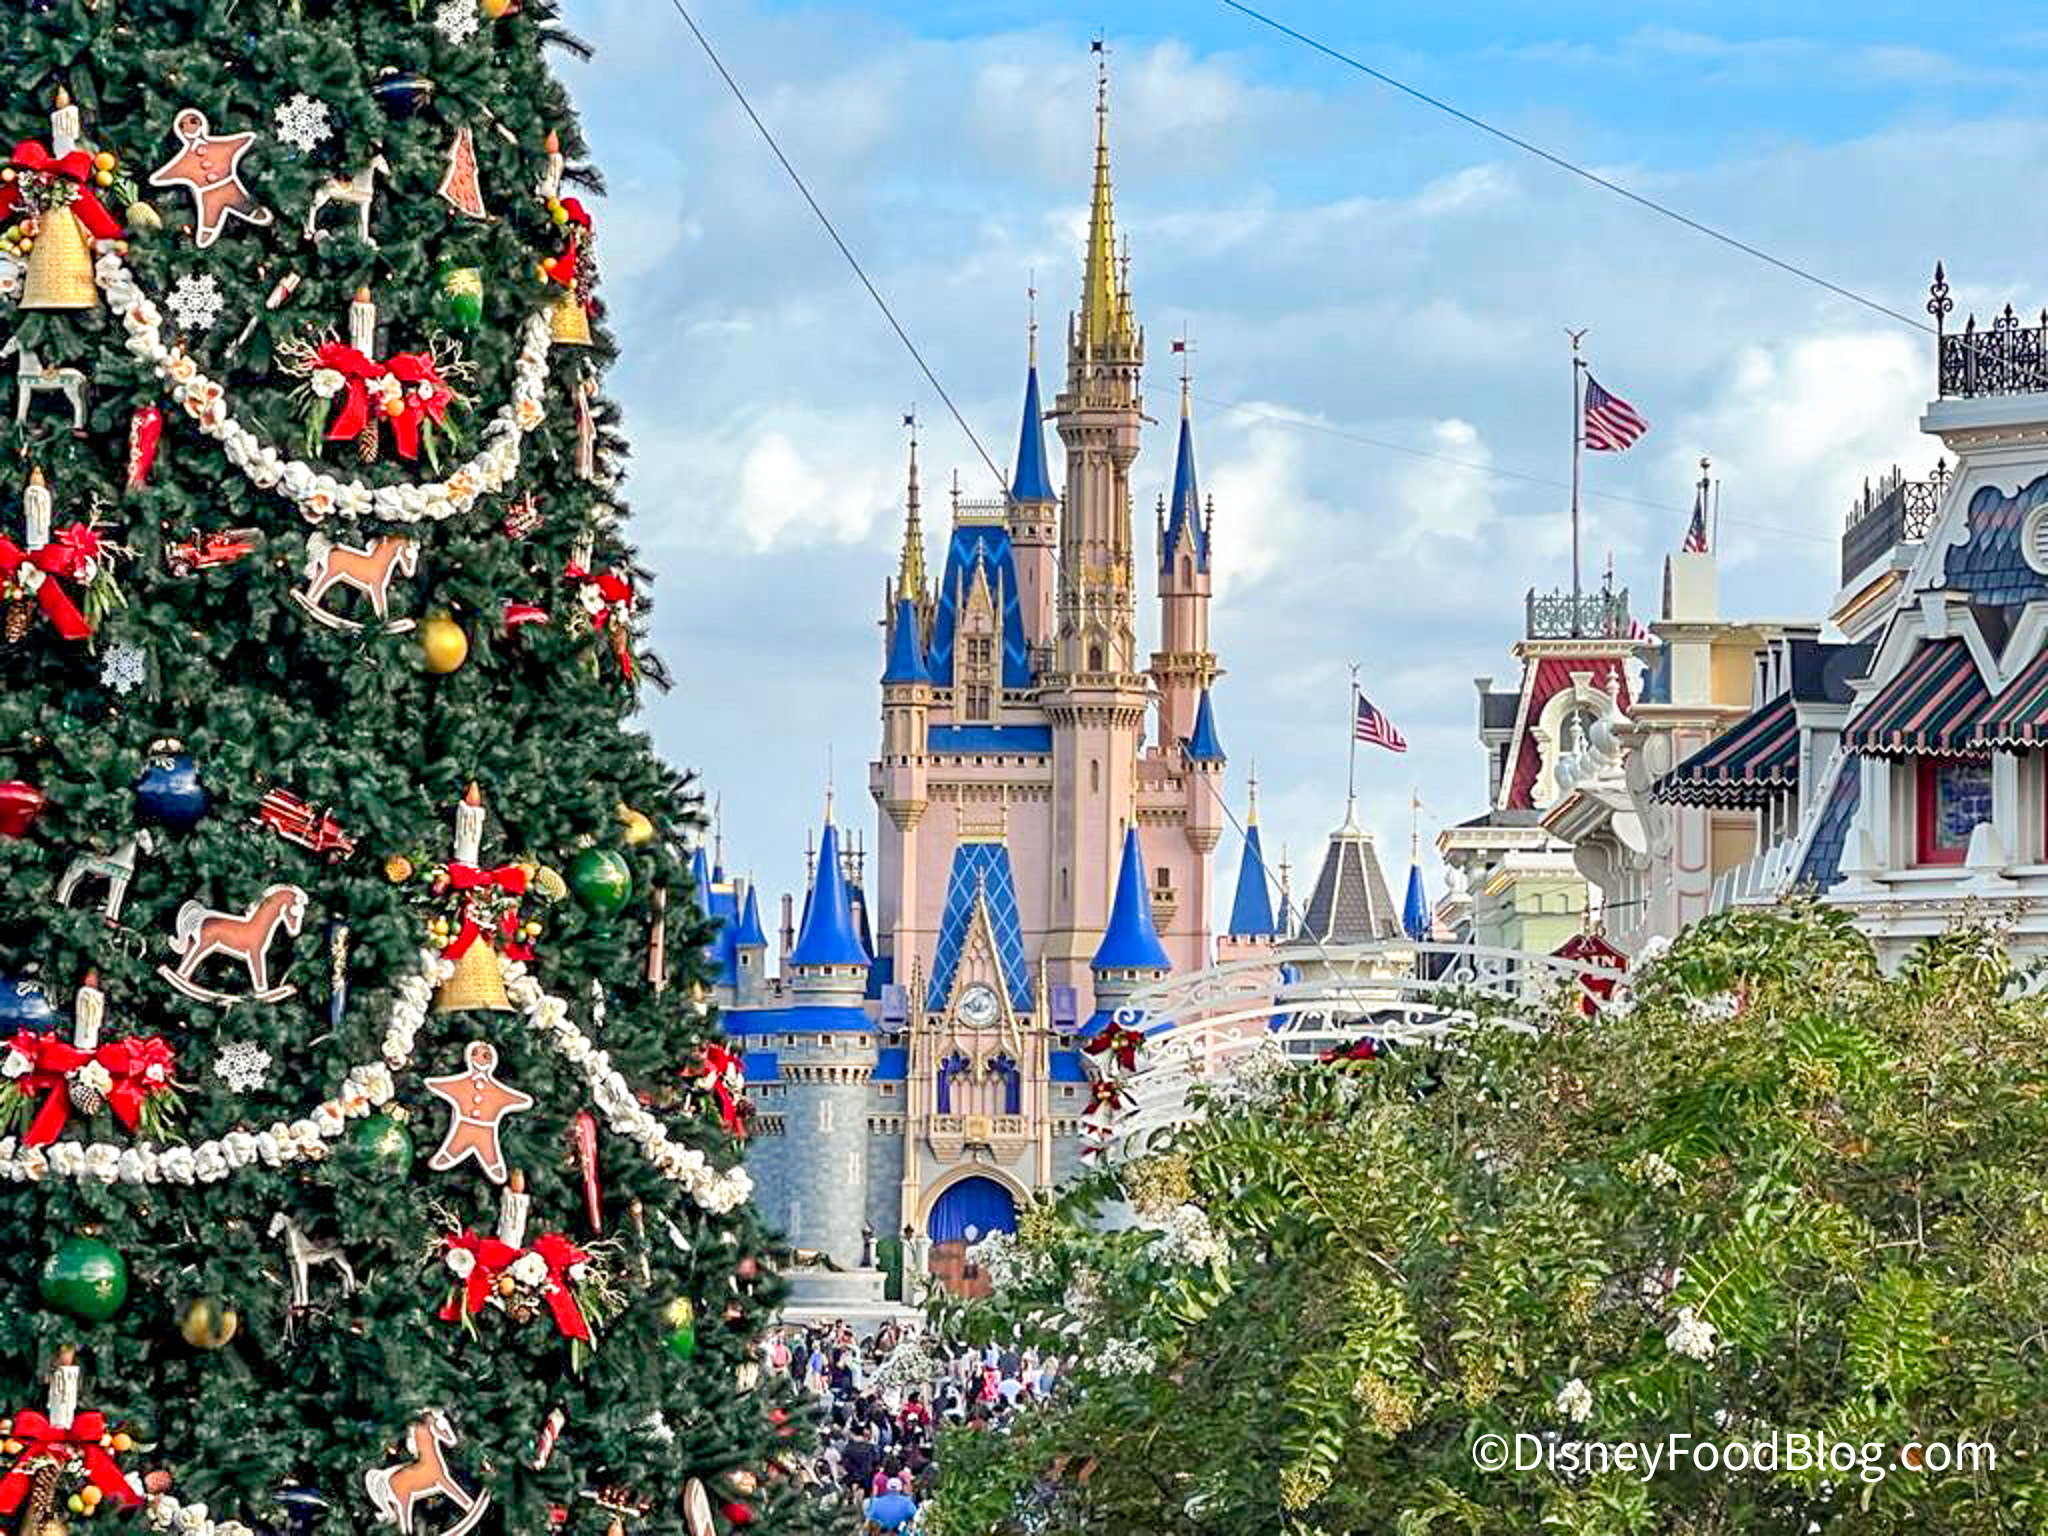 Crowds On Christmas Day At Disney World